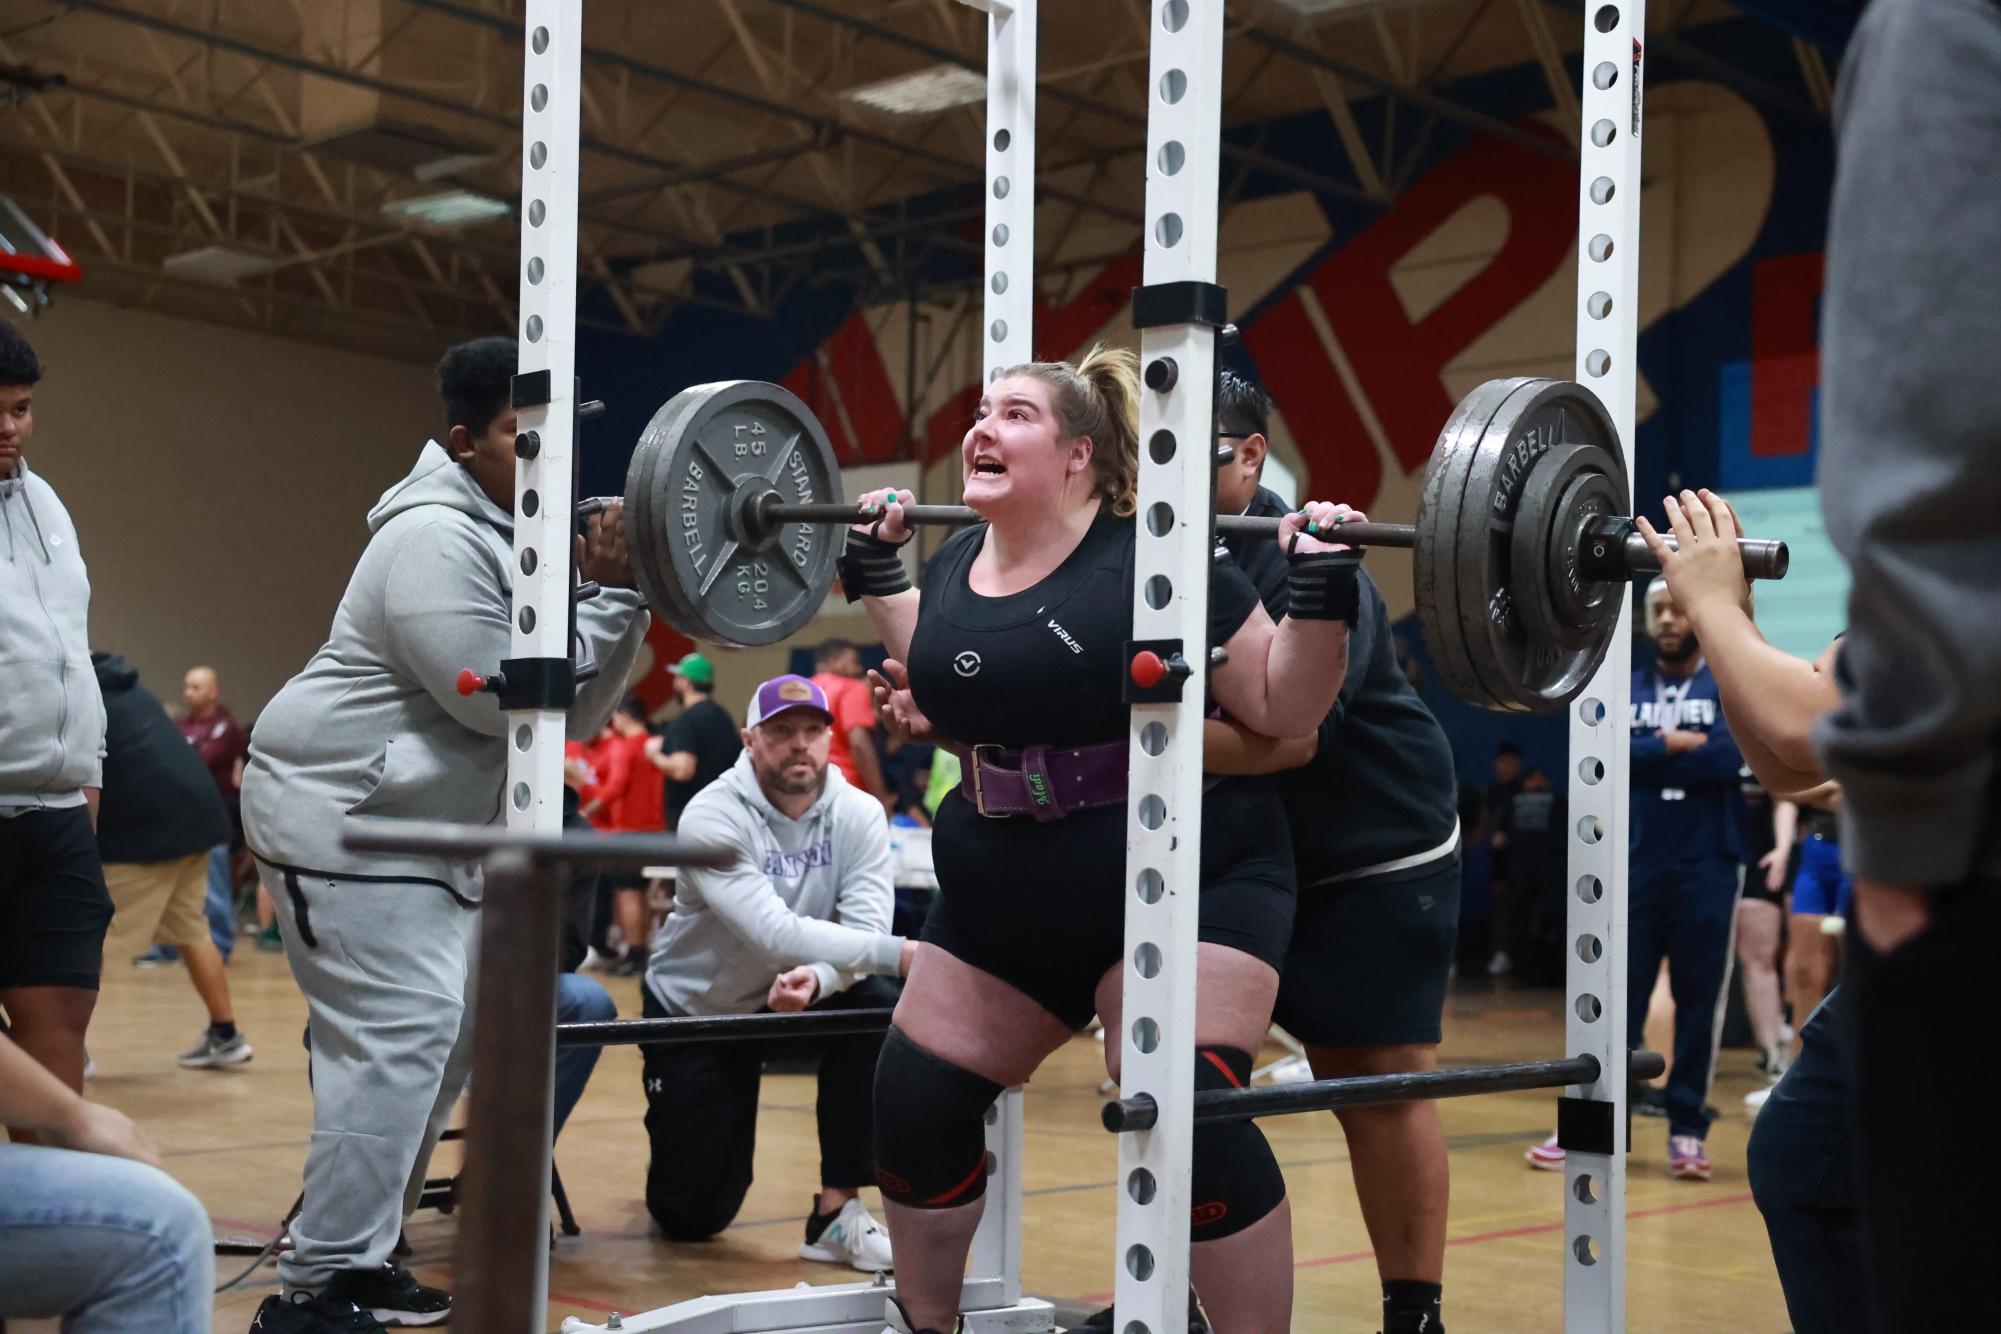 Madigan Lee Clinches State Powerlifting Title in Unequipped Division